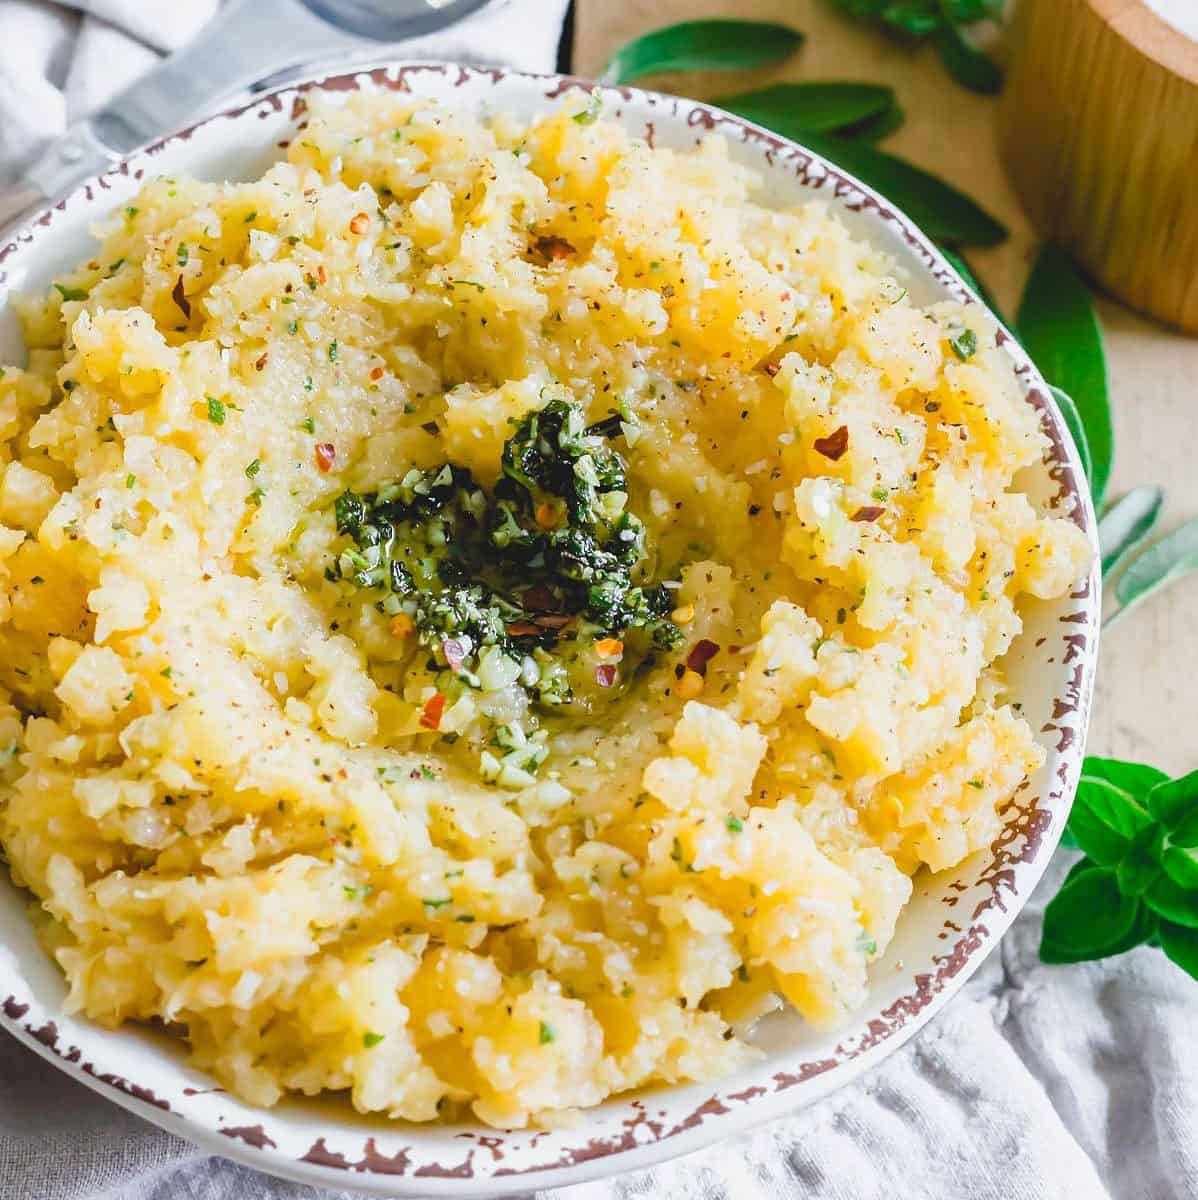  Creamy and savory mashed rutabagas for a hearty vegan dish.